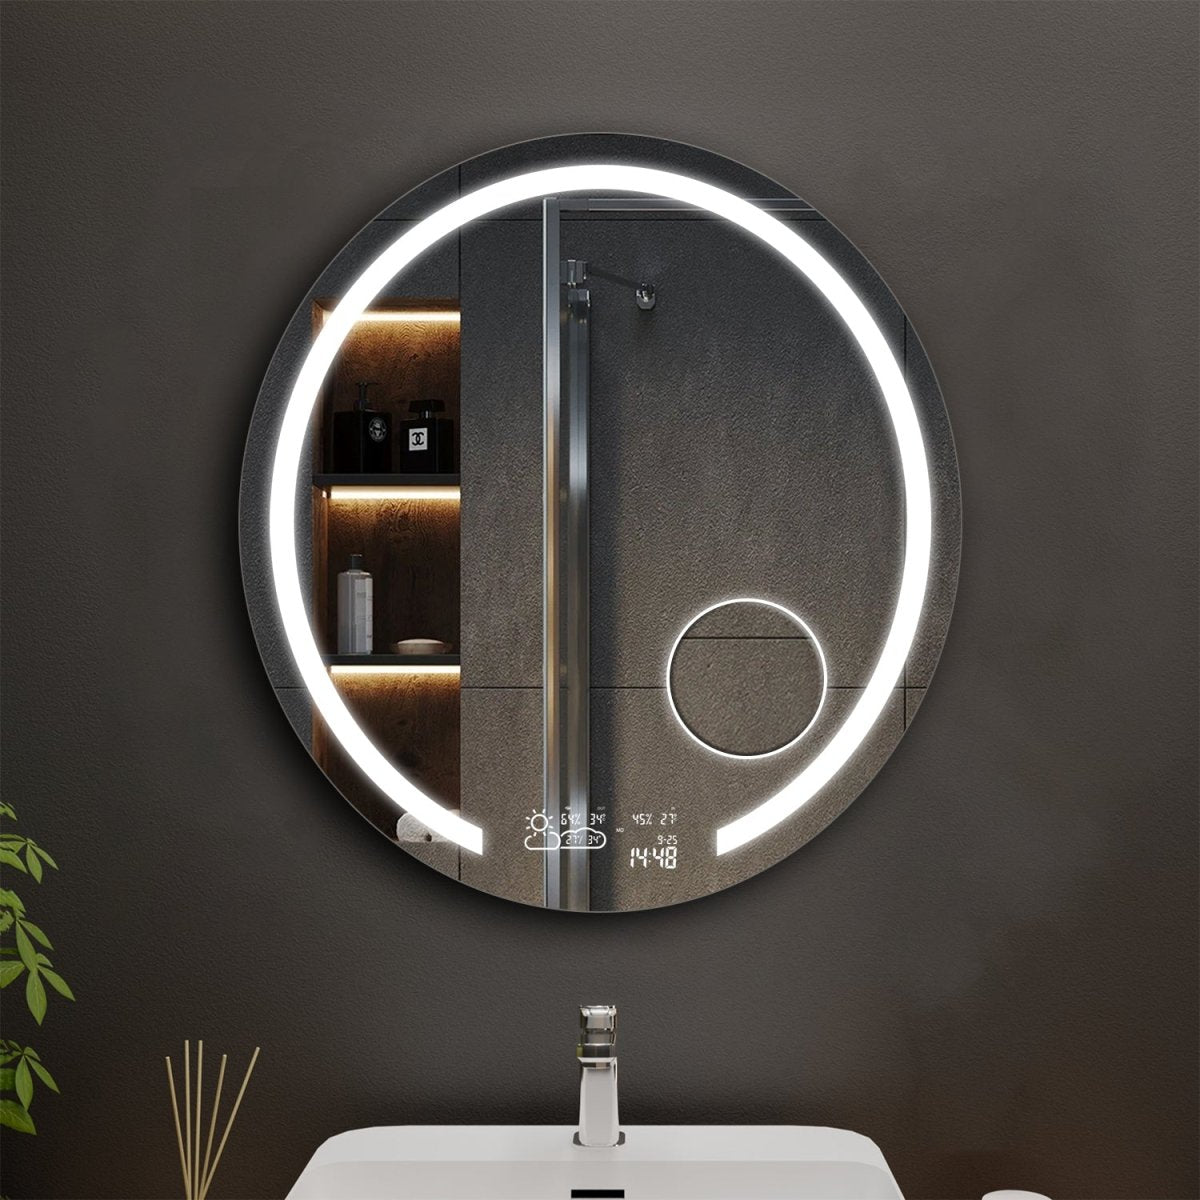 Loop Customized Round LED Bathroom Mirror, Wifi Weather Station